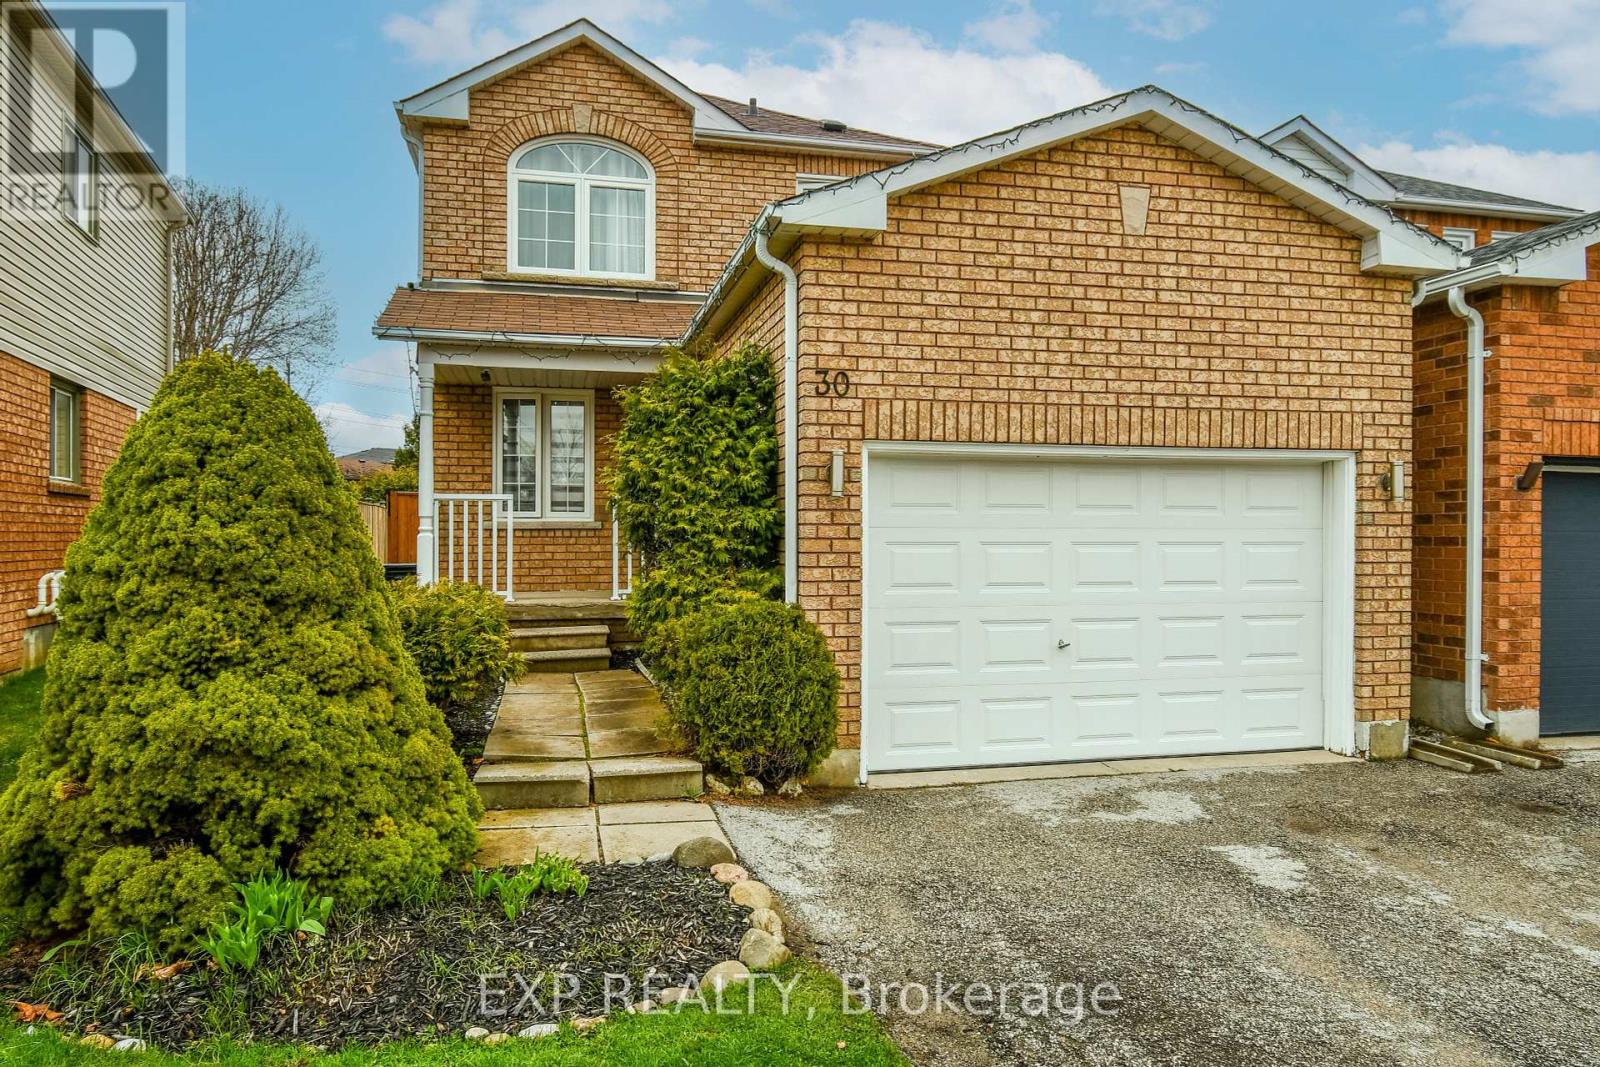 30 AIKENS CRES, barrie, Ontario